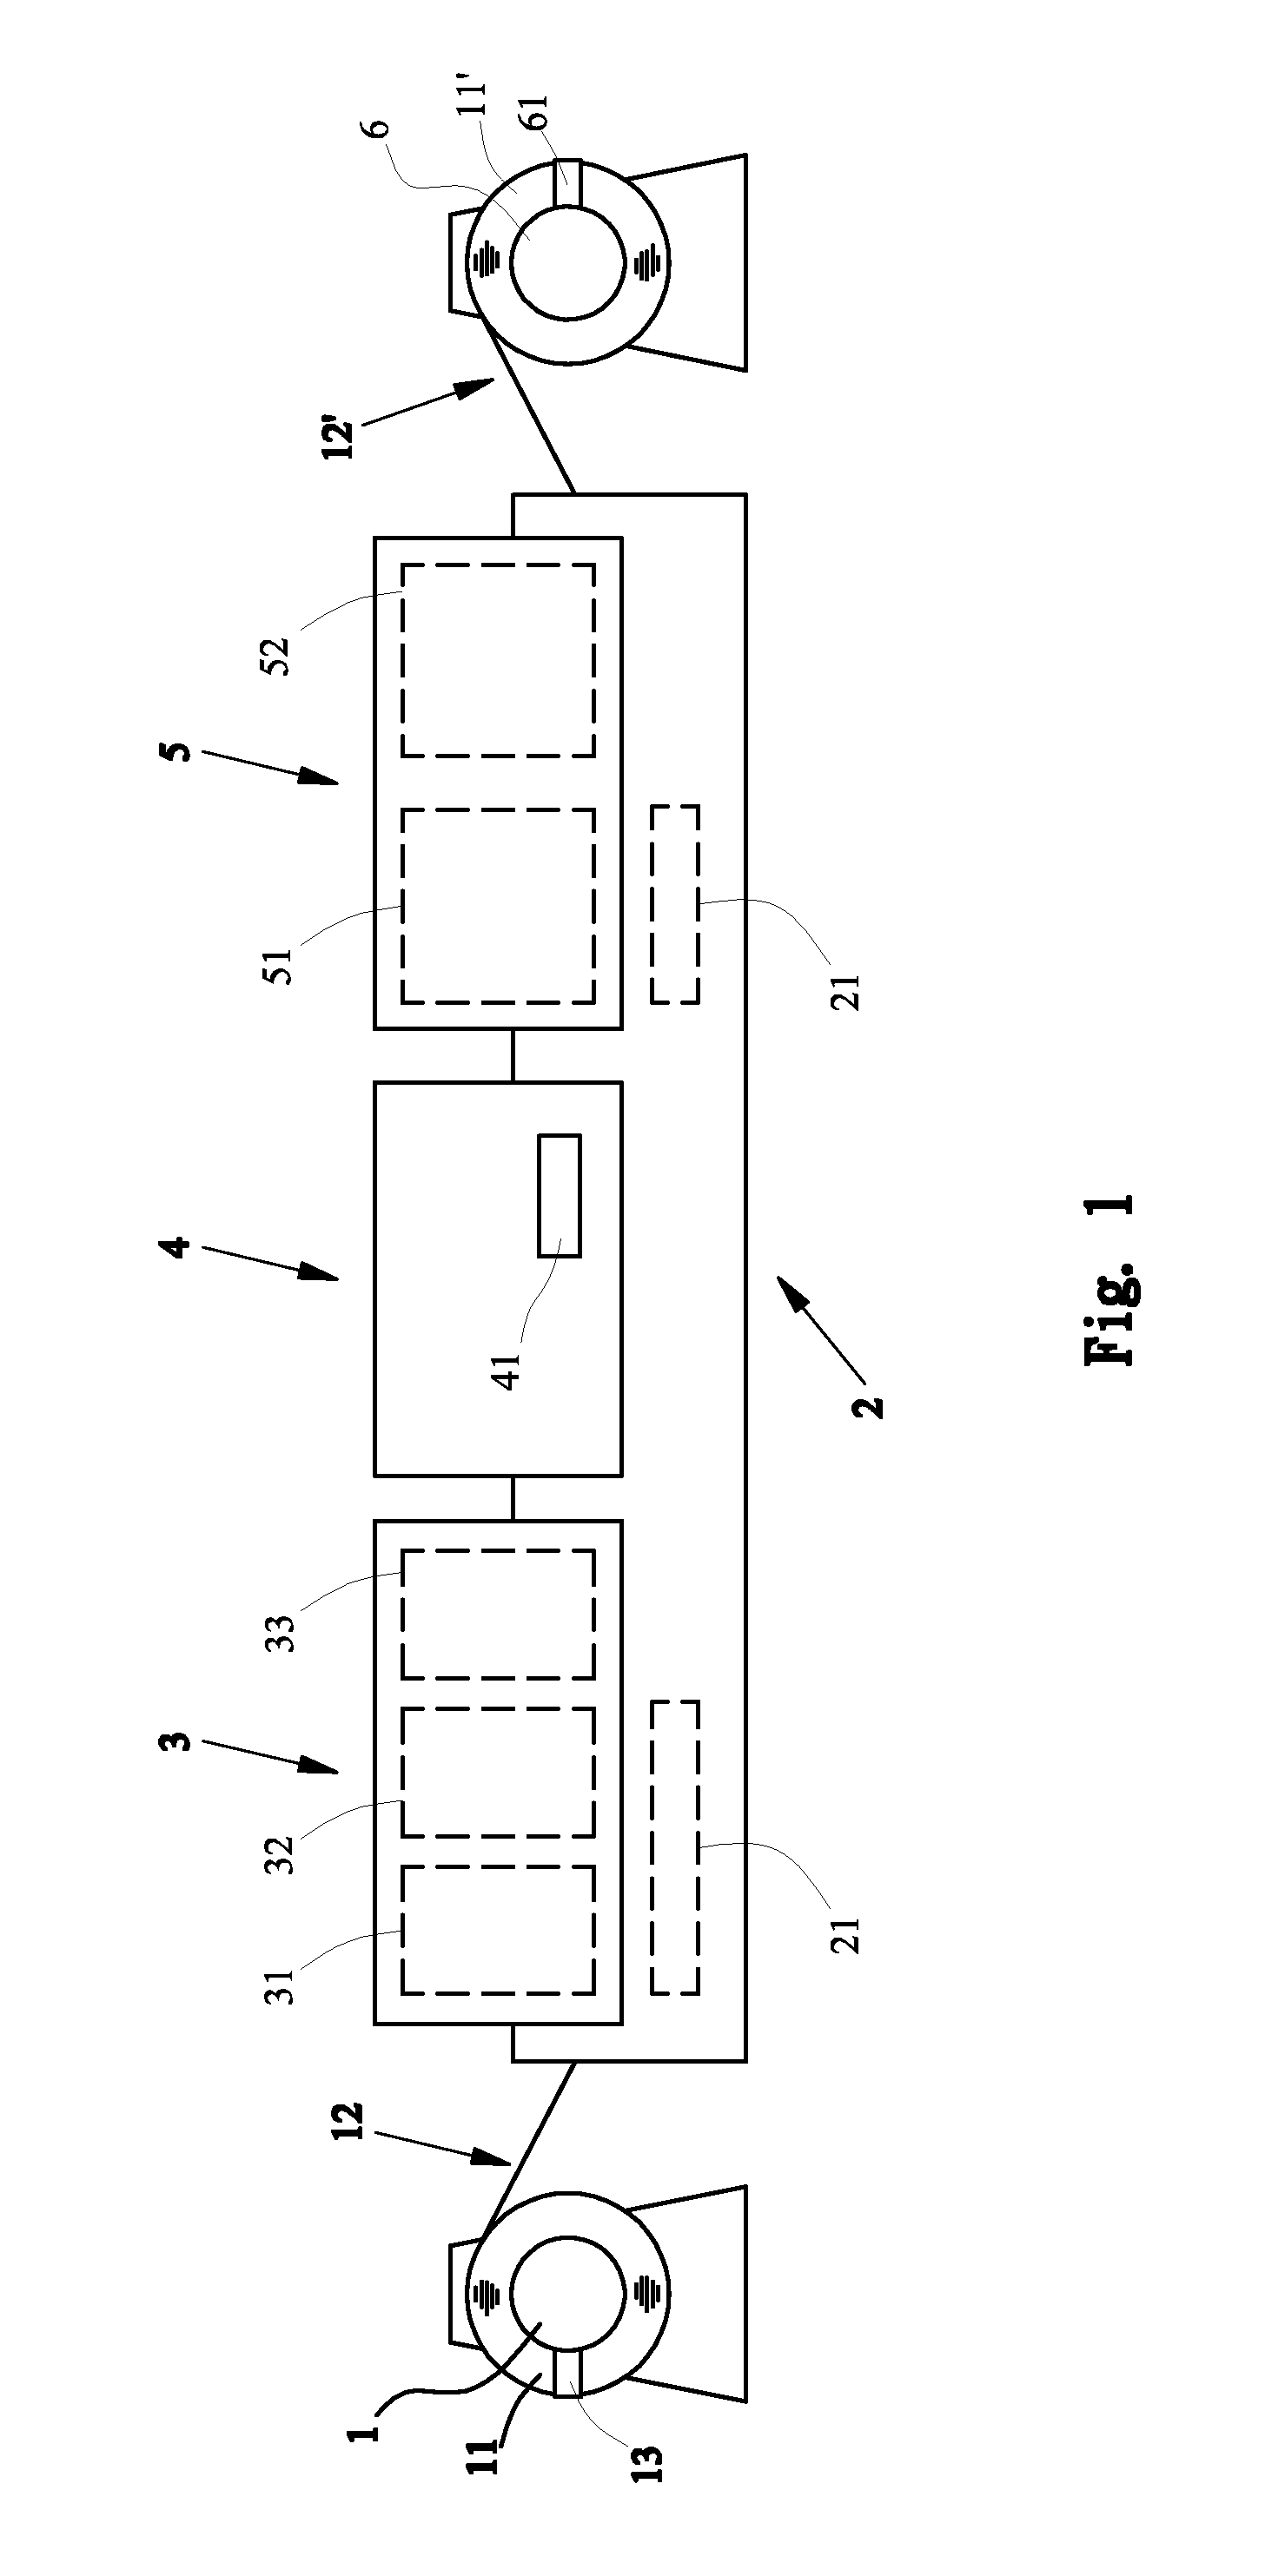 Roll-to-roll electrochemical polish apparatus